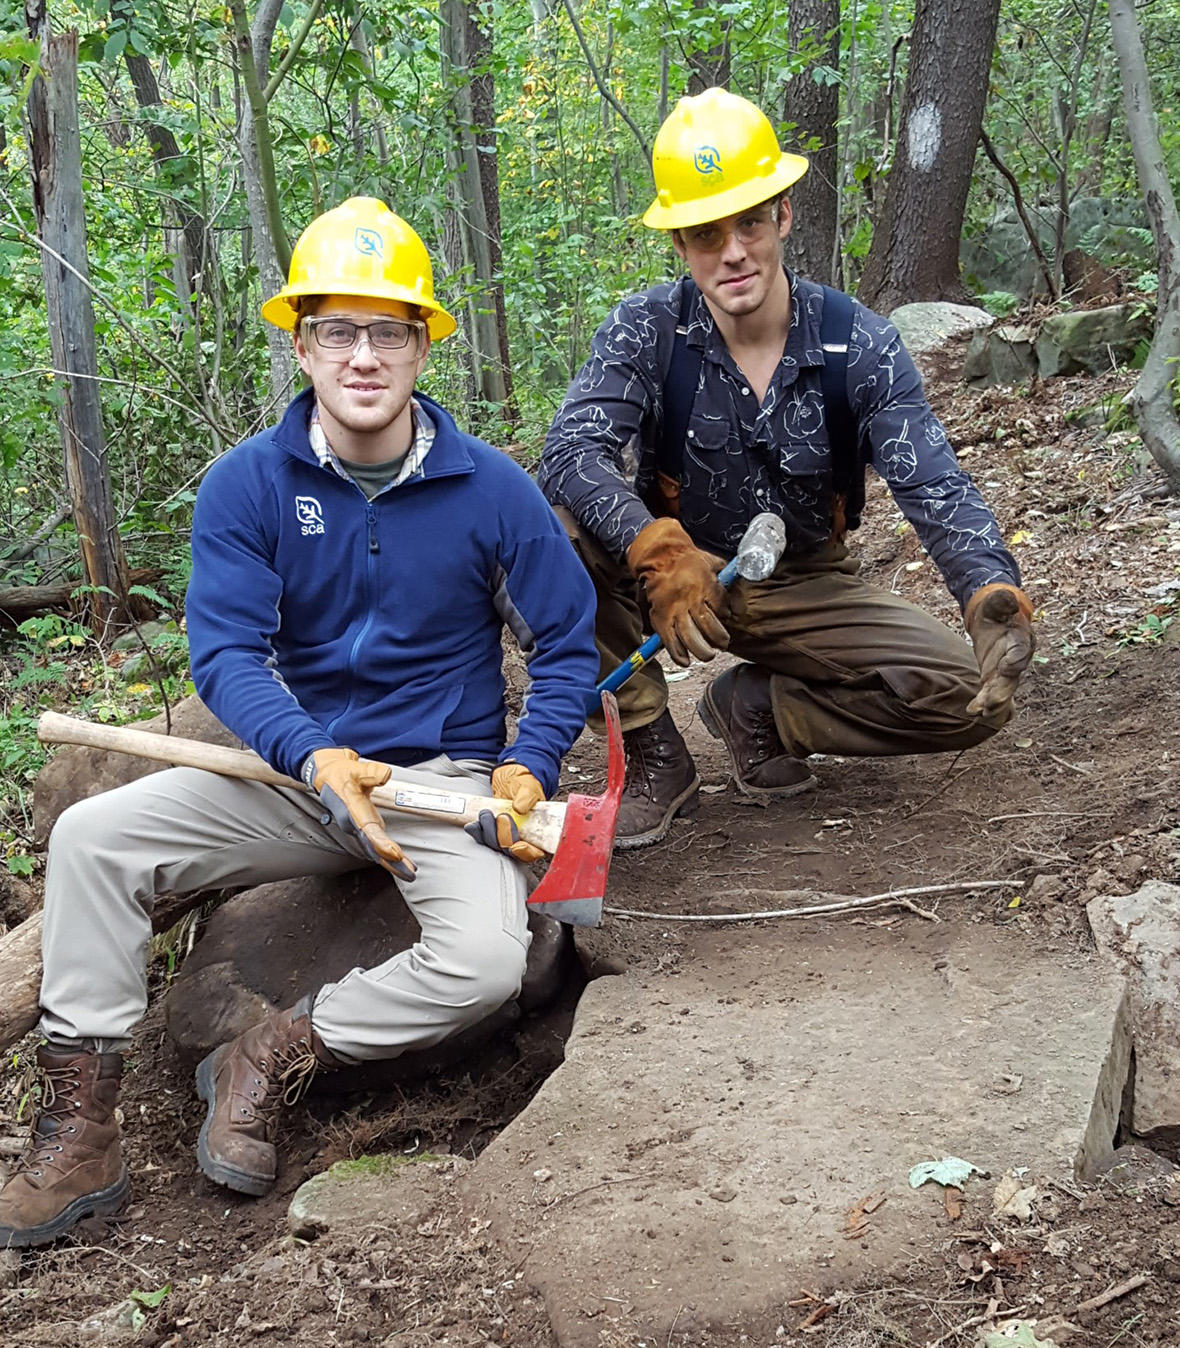 Caleb (right) with one of his SCA Leader crewmates undertaking major trail work on the Potomac Heritage National Trail in Pennsylvania's Laurel highlands. 